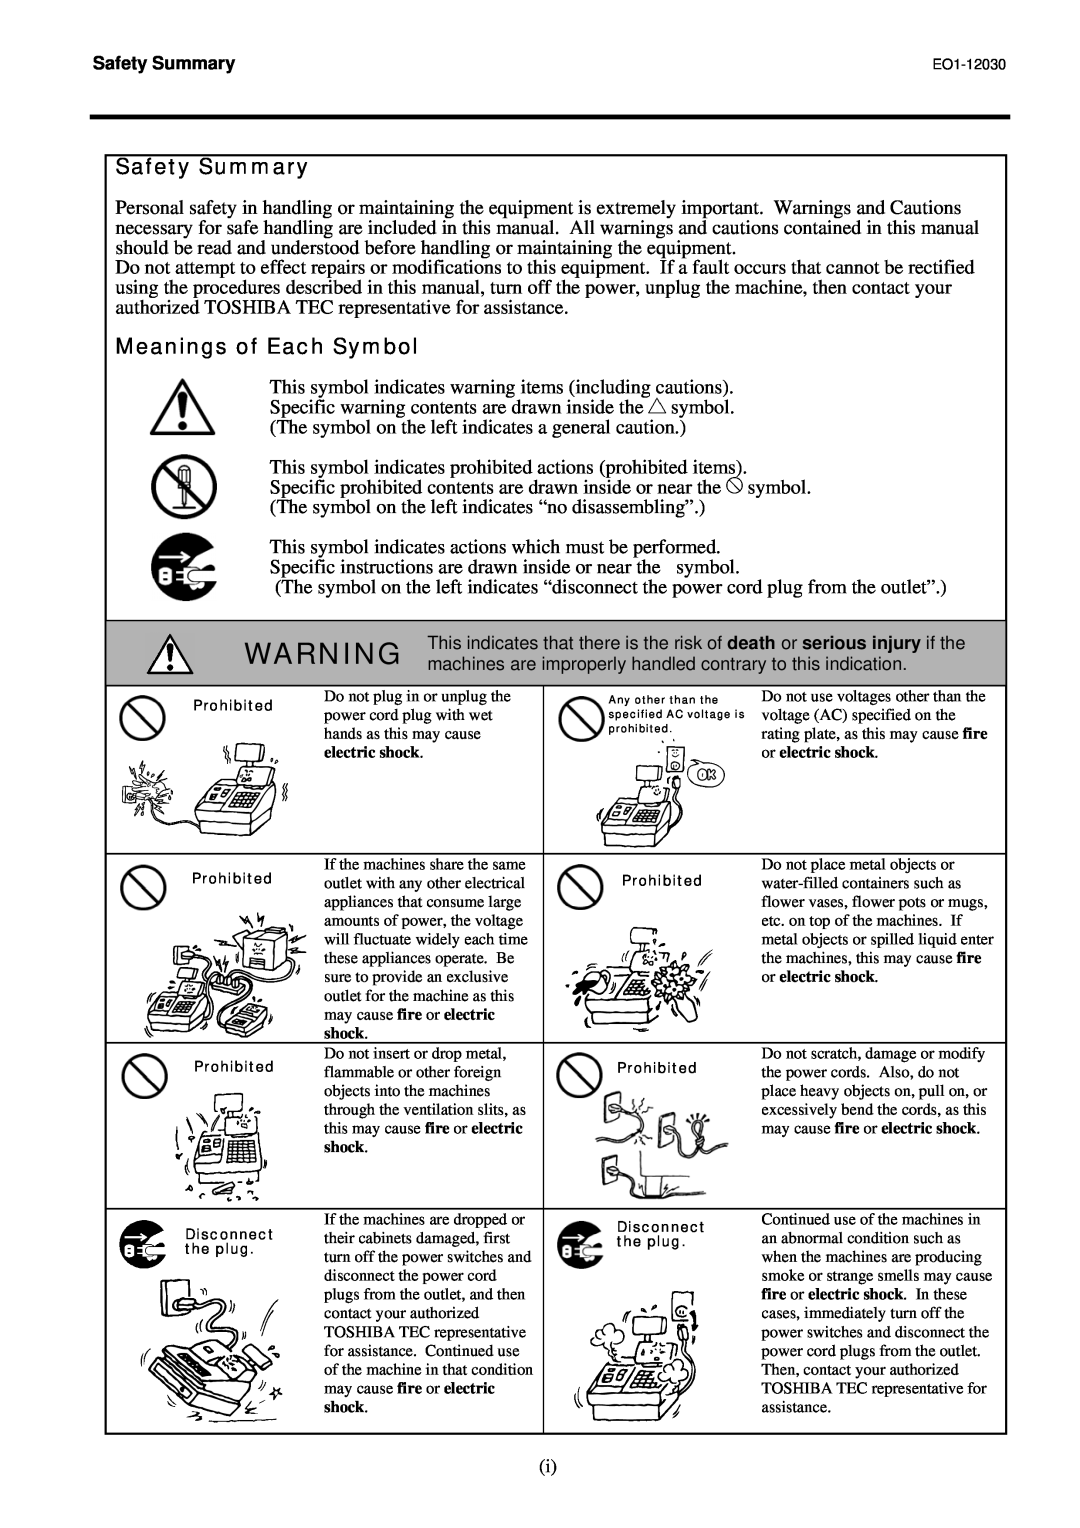 Toshiba ST-7000-C Series owner manual Safety Summary, Meanings of Each Symbol 